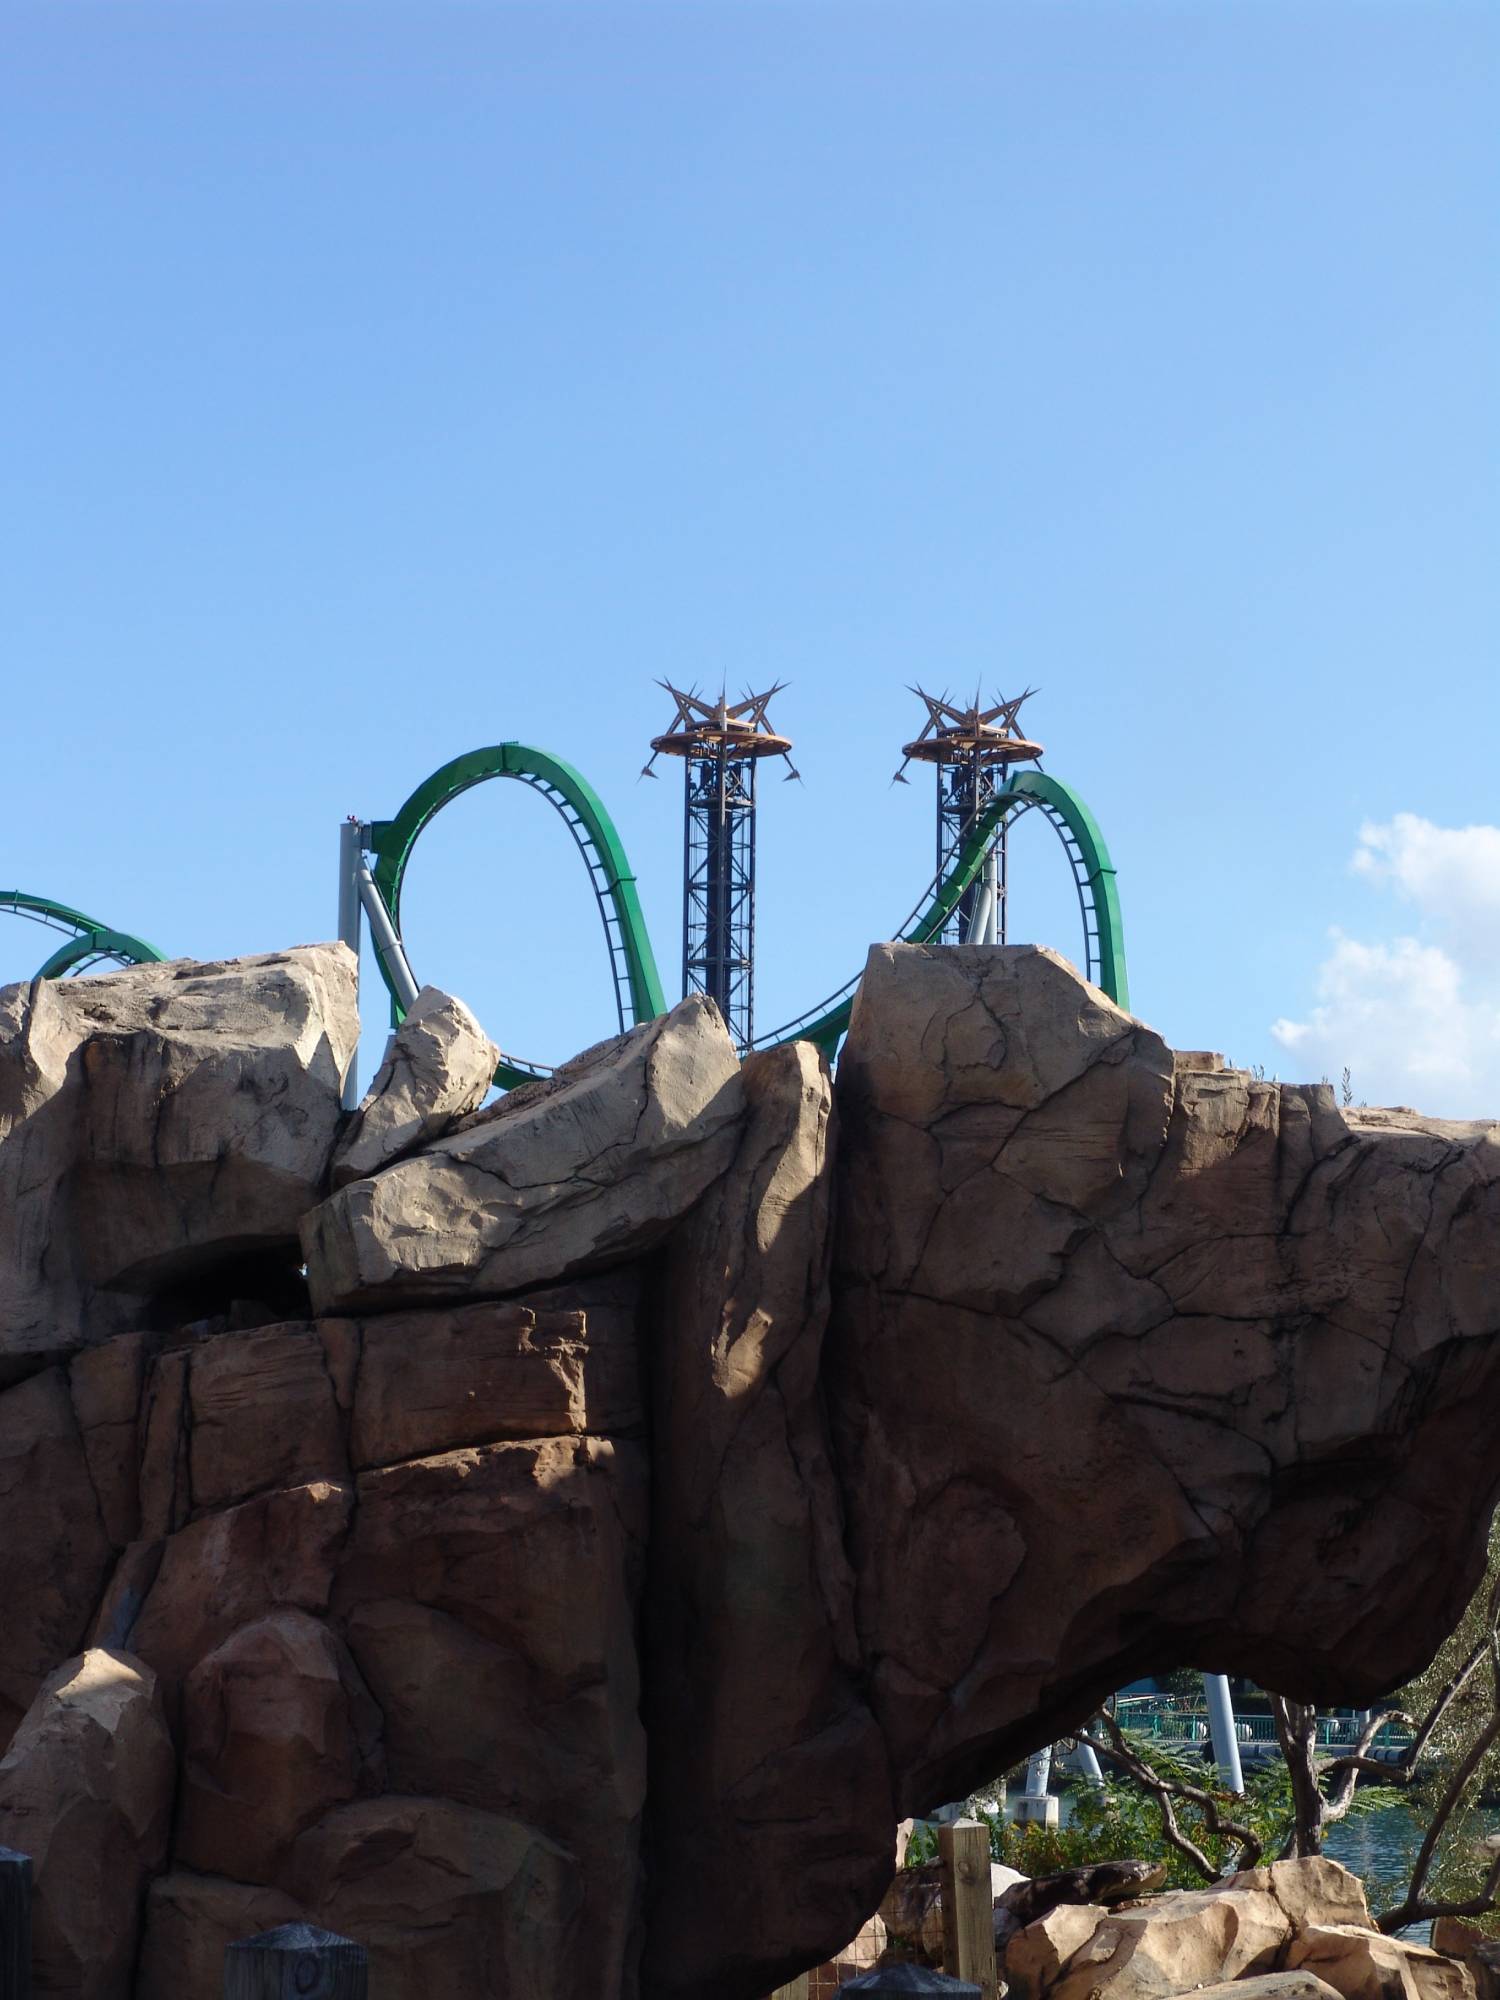 Islands of Adventure - Lost Continent and Dr. Doom's Fearfall